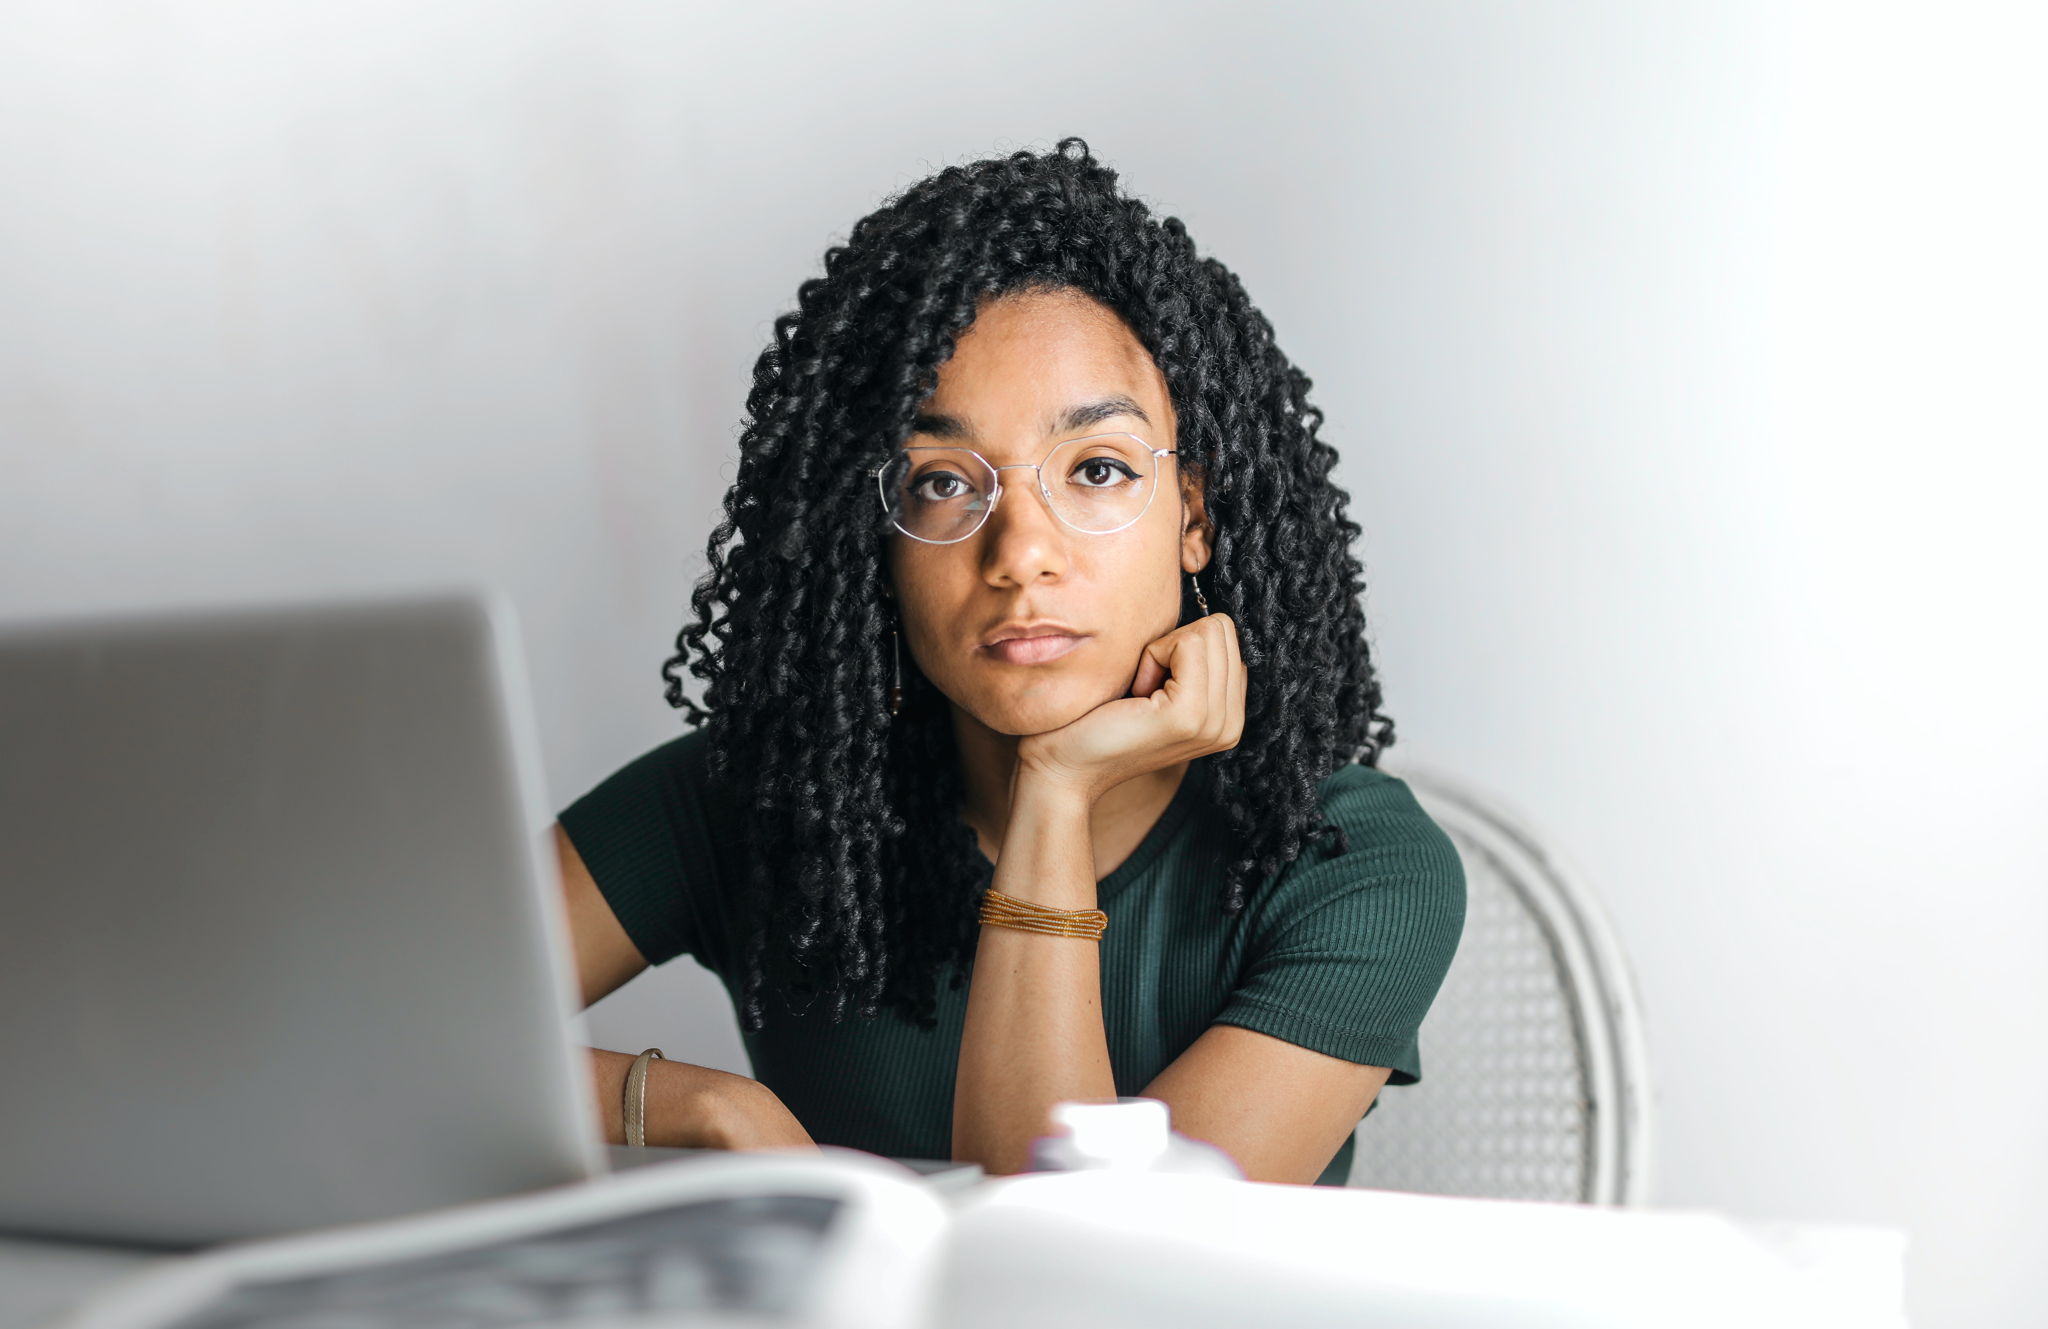 An afro-american girl with curly hair sit in front of a laptop with a serious thinking expression.